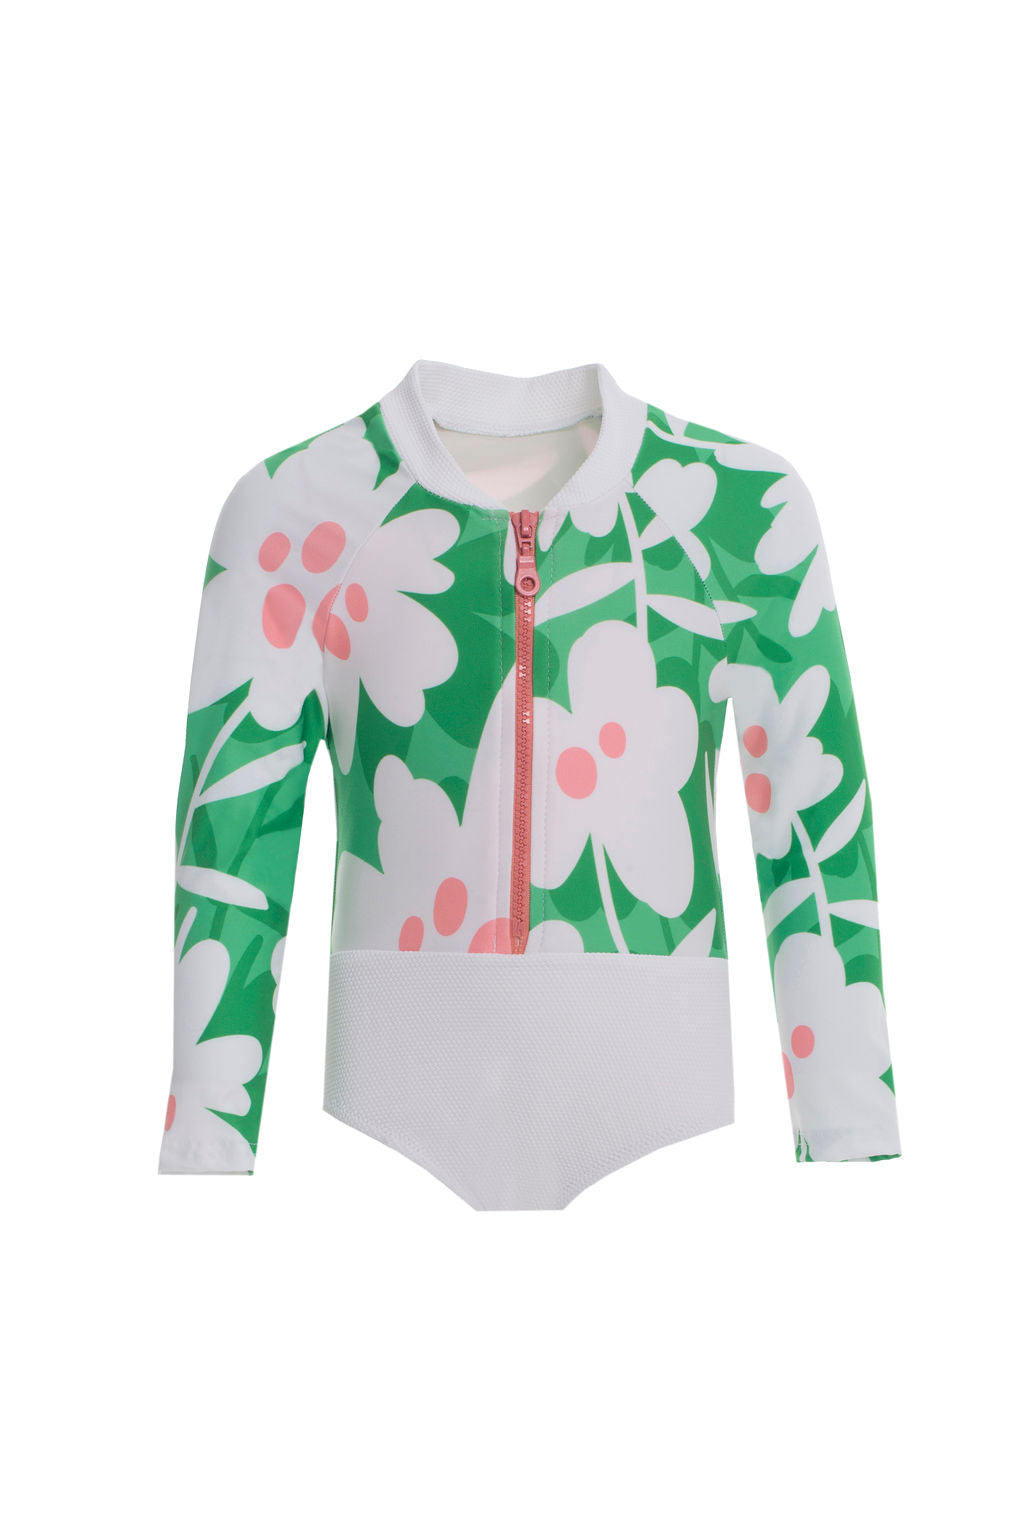 Kids Erica Long-Sleeve Zip Onepiece | Floral-White